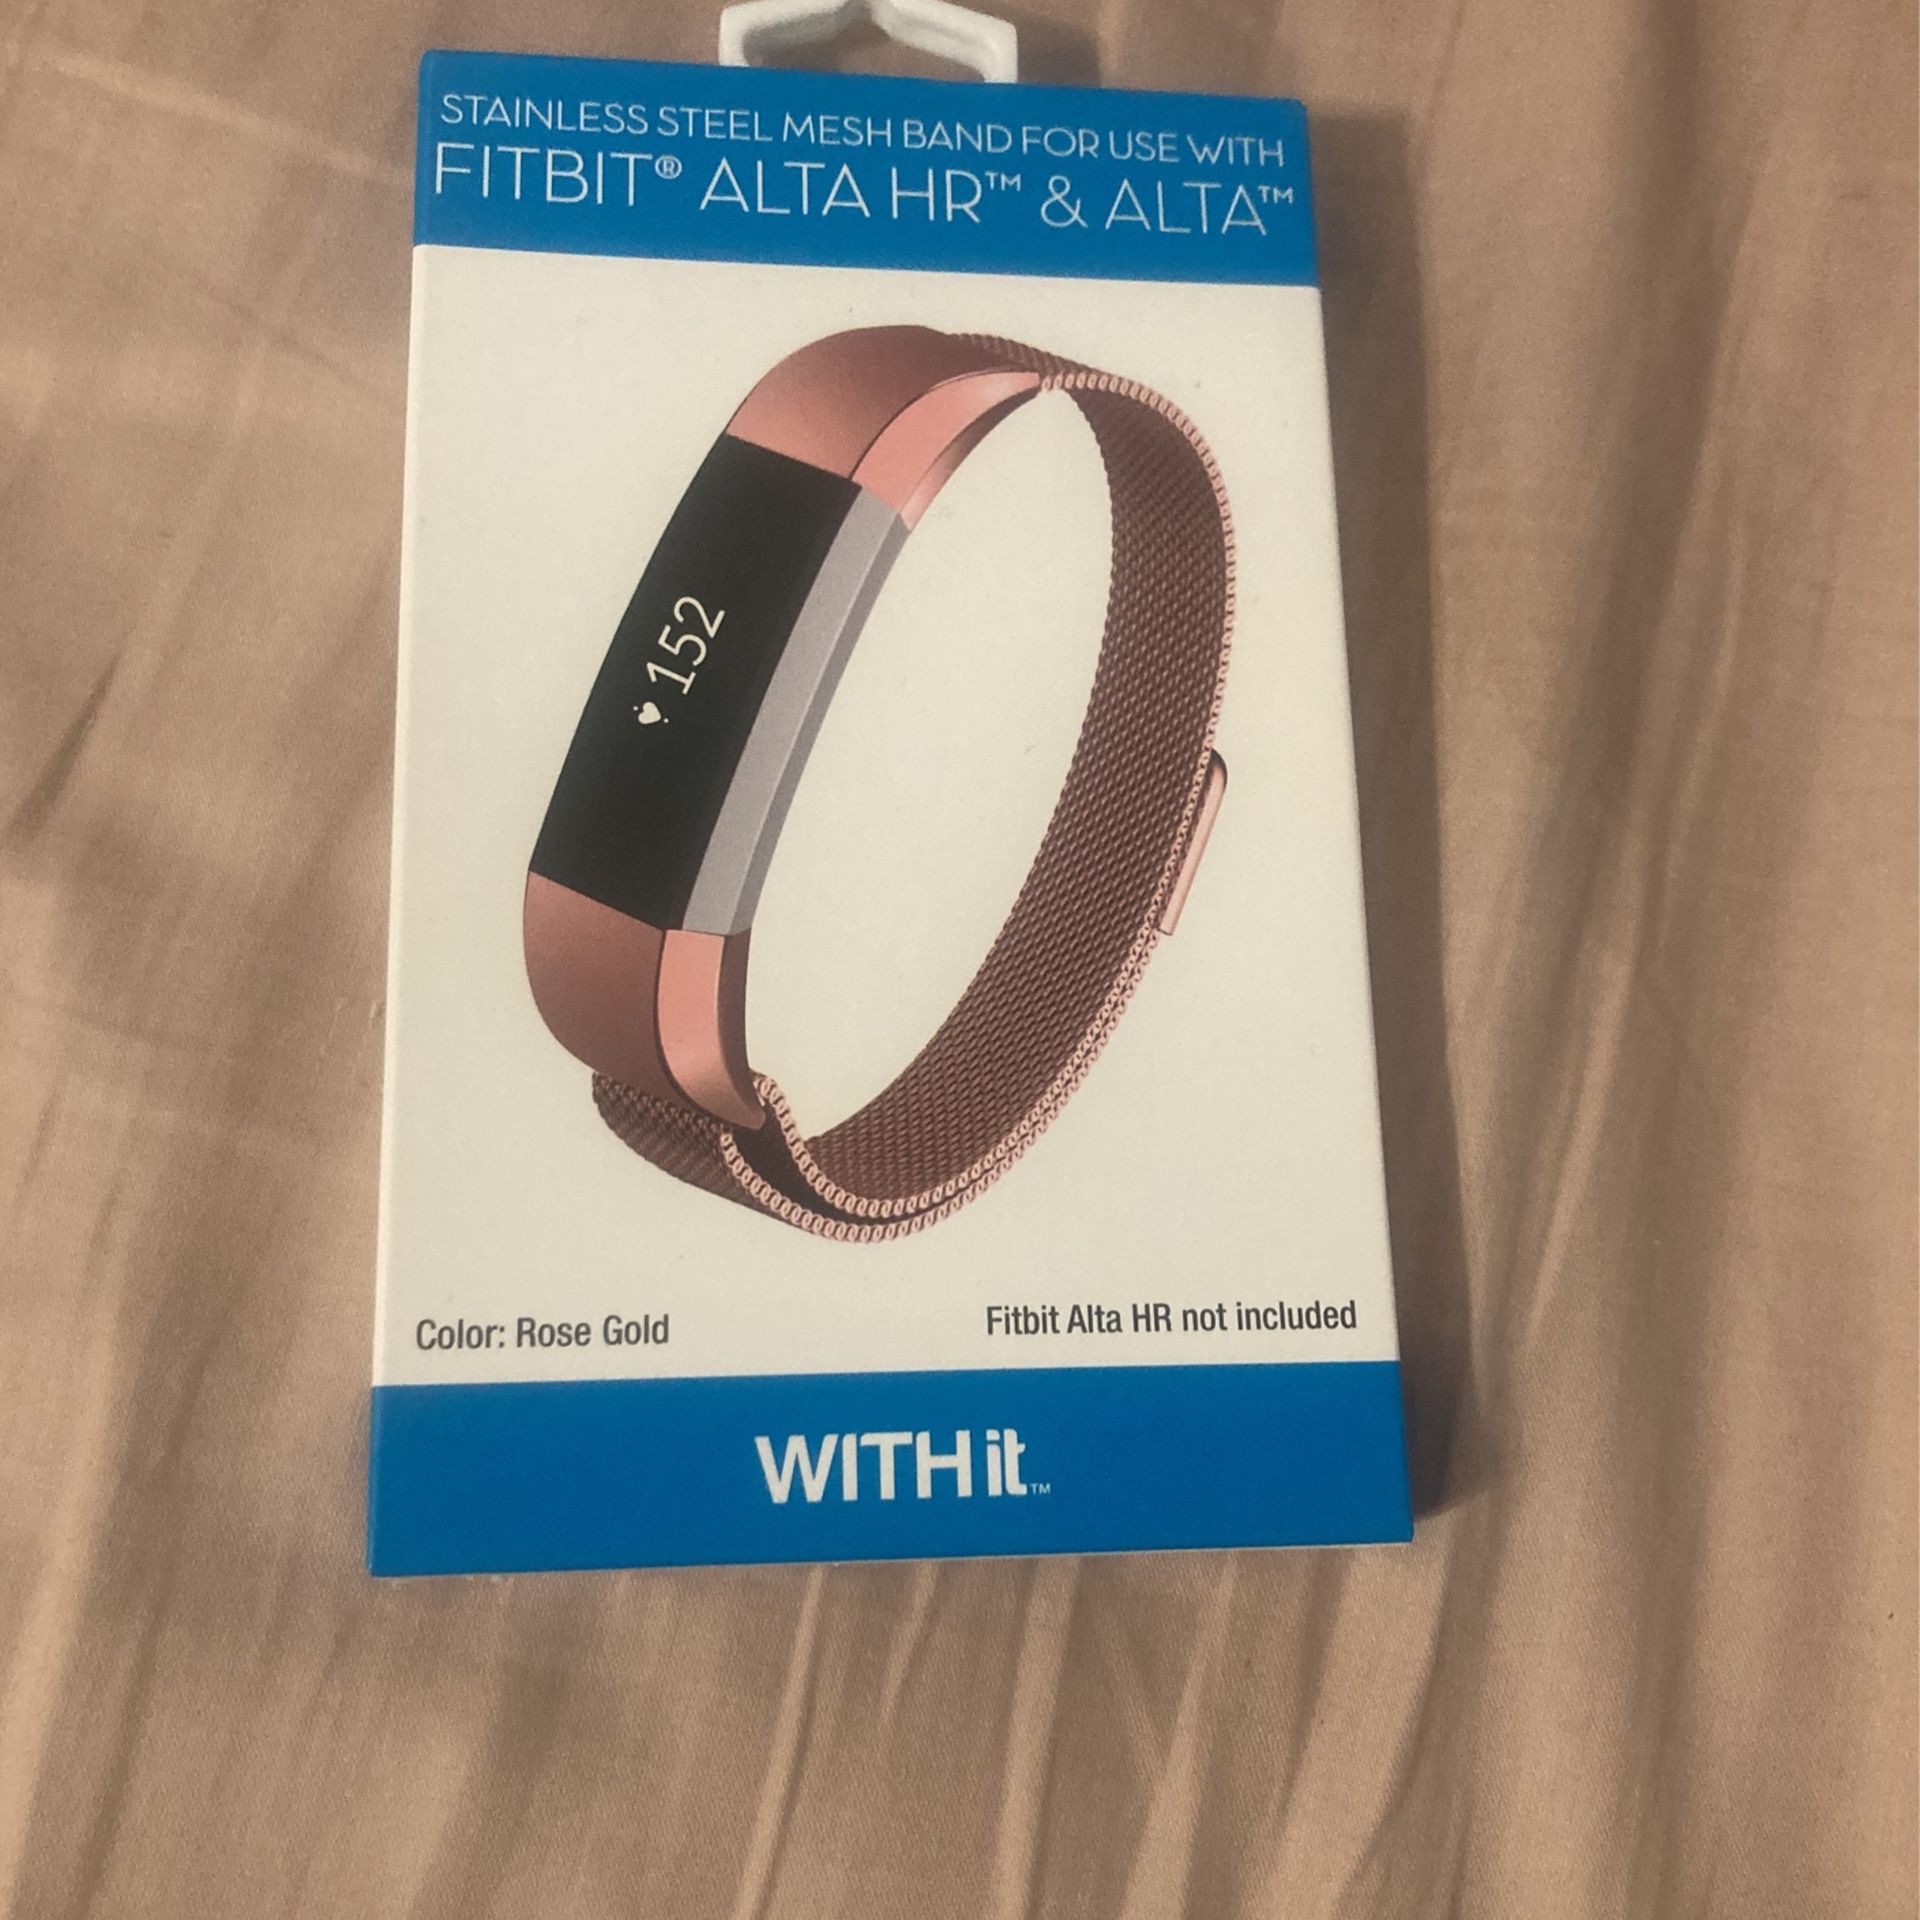 Stainless Mesh Band For Use With FitBit, ALTA HR & ALTA